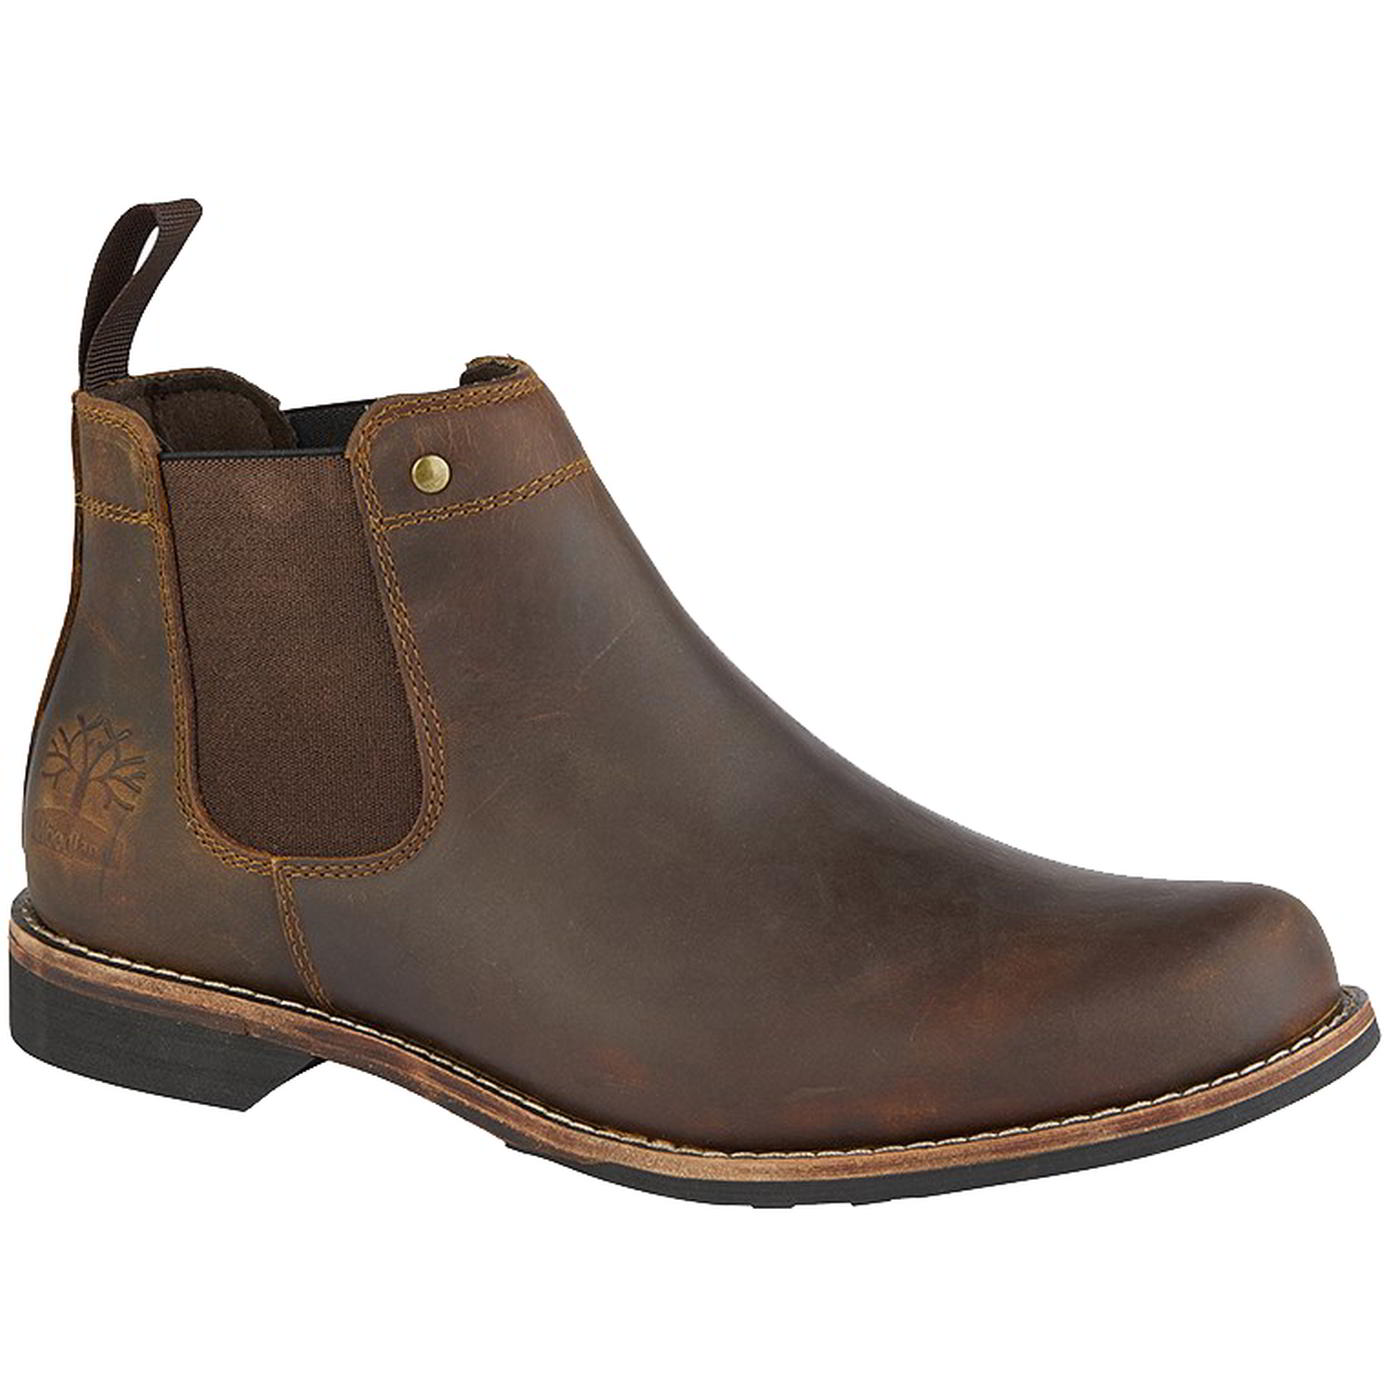 Woodland Men's Leather Chelsea Ankle Boots - UK 8